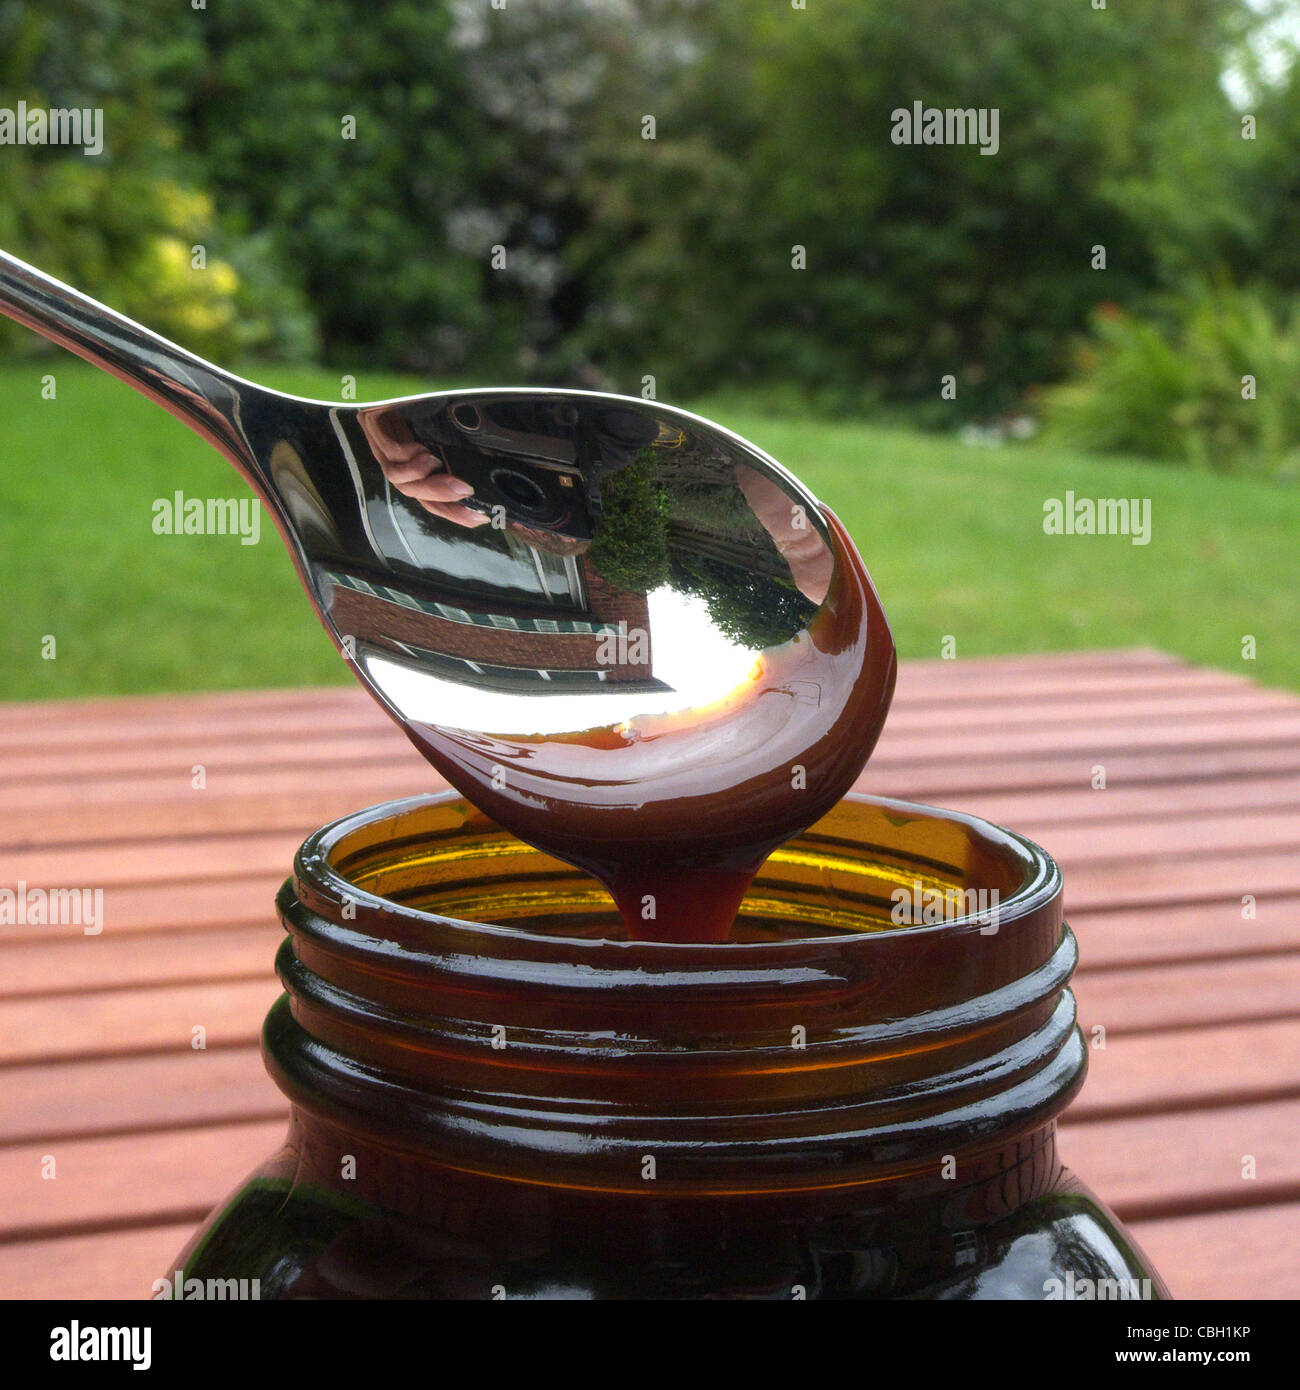 Spooning out Marmite ( Yeast Extract Spread ) from a jar using a teaspoon, UK MODEL RELEASED Stock Photo